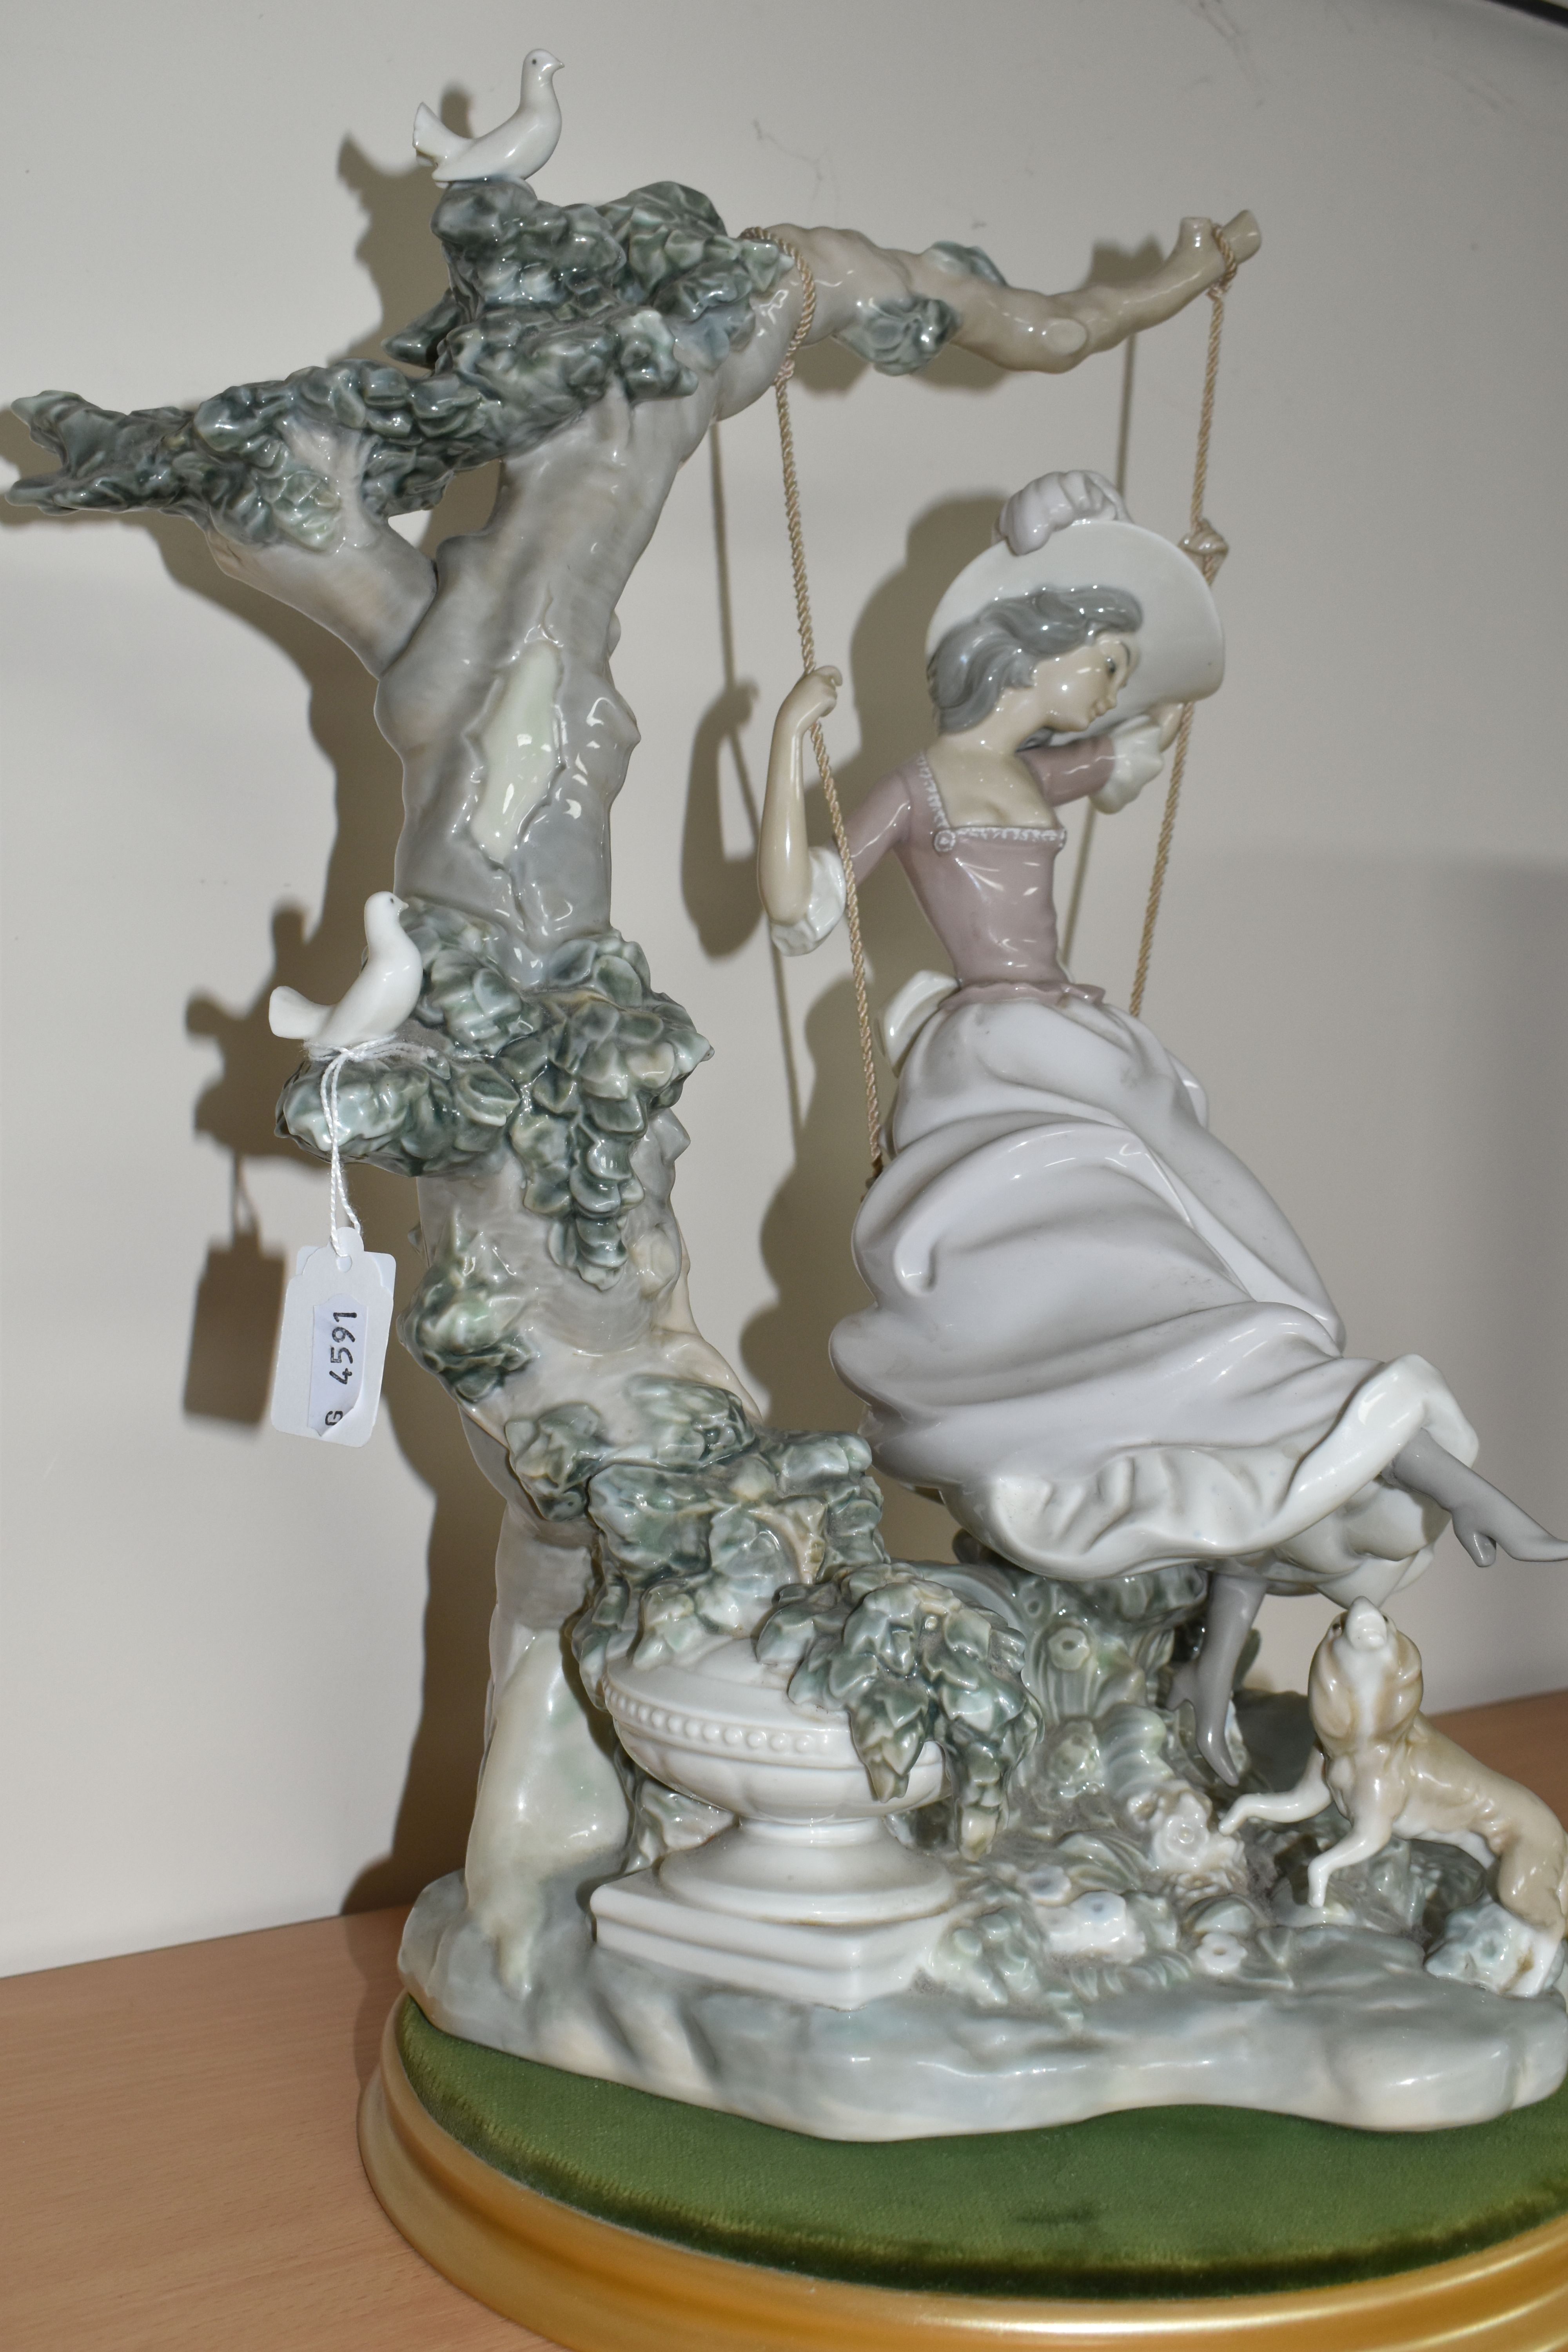 A LLADRO 'SWINGING' SCULPTURE OF A GIRL ON A SWING, model no 1297, sculptor Salvador Debon, issued - Image 3 of 7